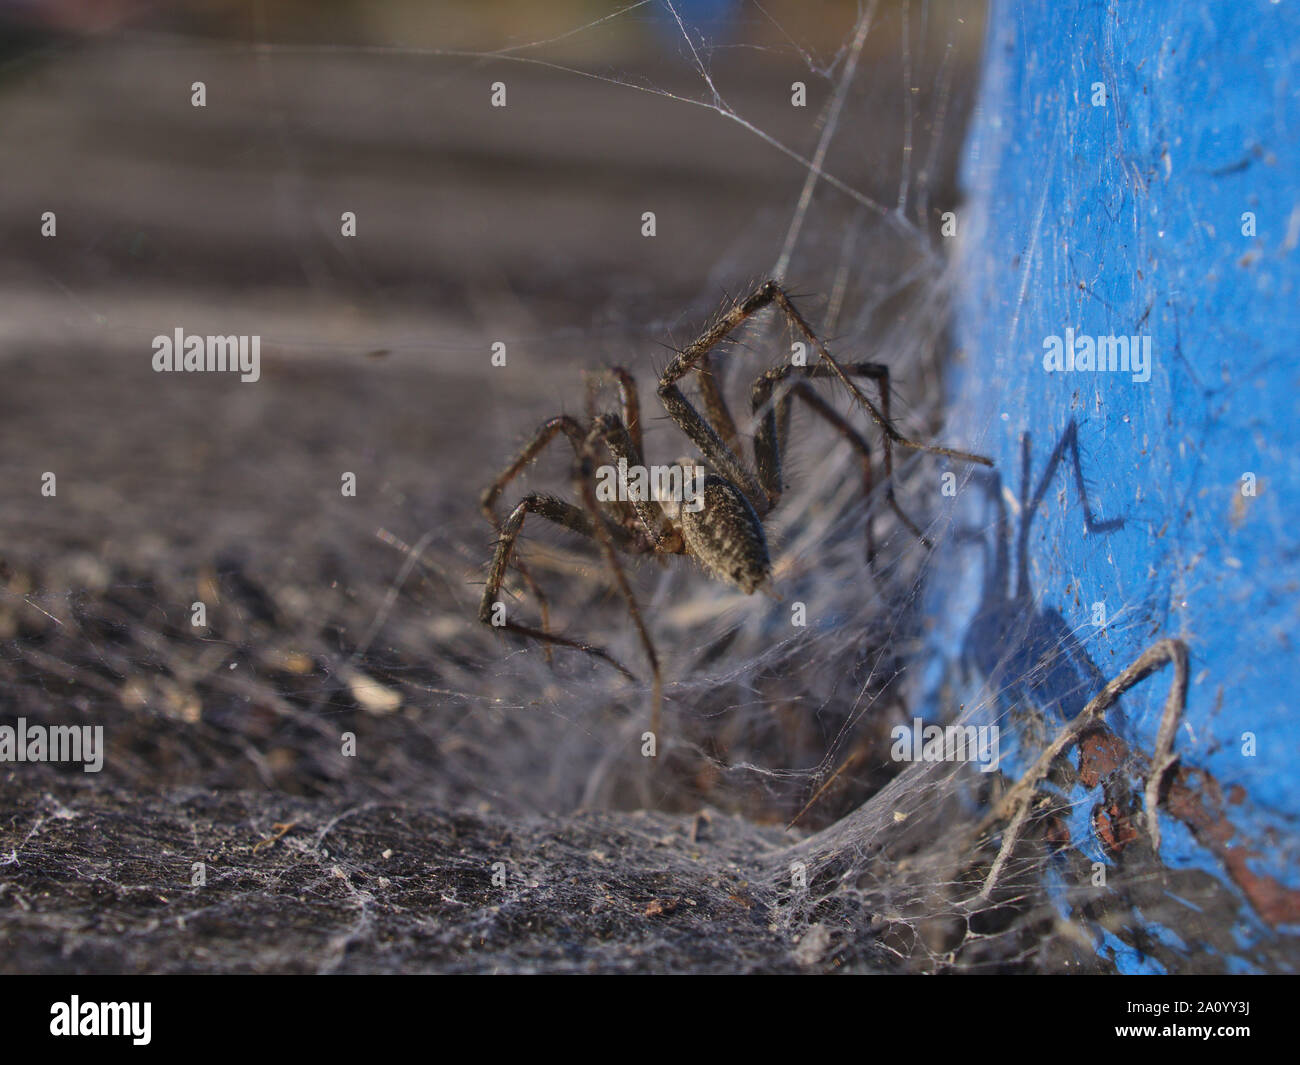 Rear view of a grass spider (Agelenopsis spp.) sunning itself on its web, early morning, on the dock at Dow's Lake, Ottawa, Ontario, Canada. Stock Photo